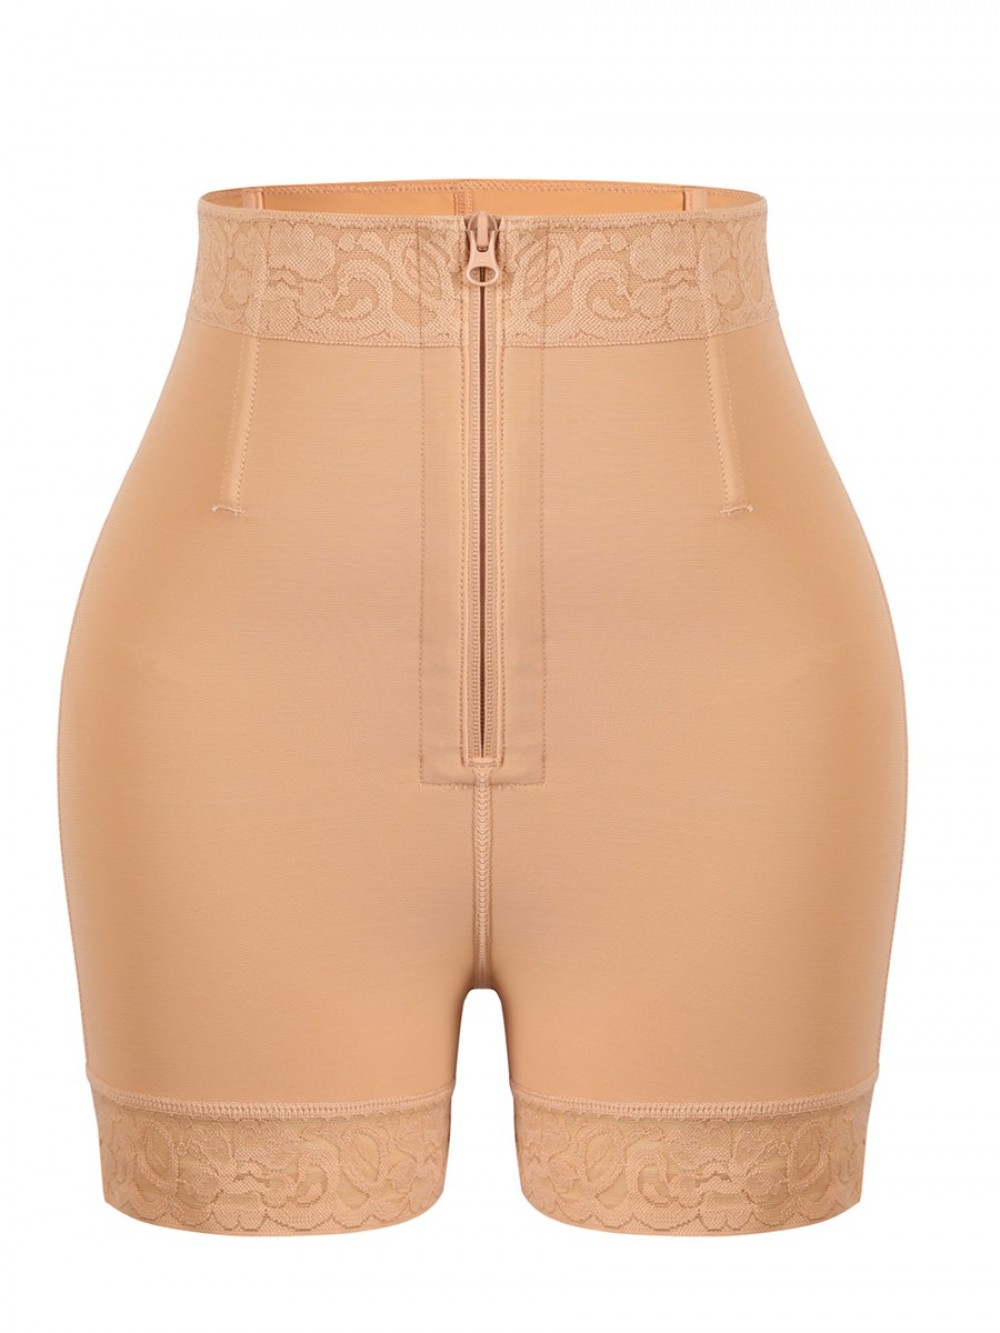 Deep Nude Butt Lifter With Front Zipper Lace Trim Smooth Abdomen